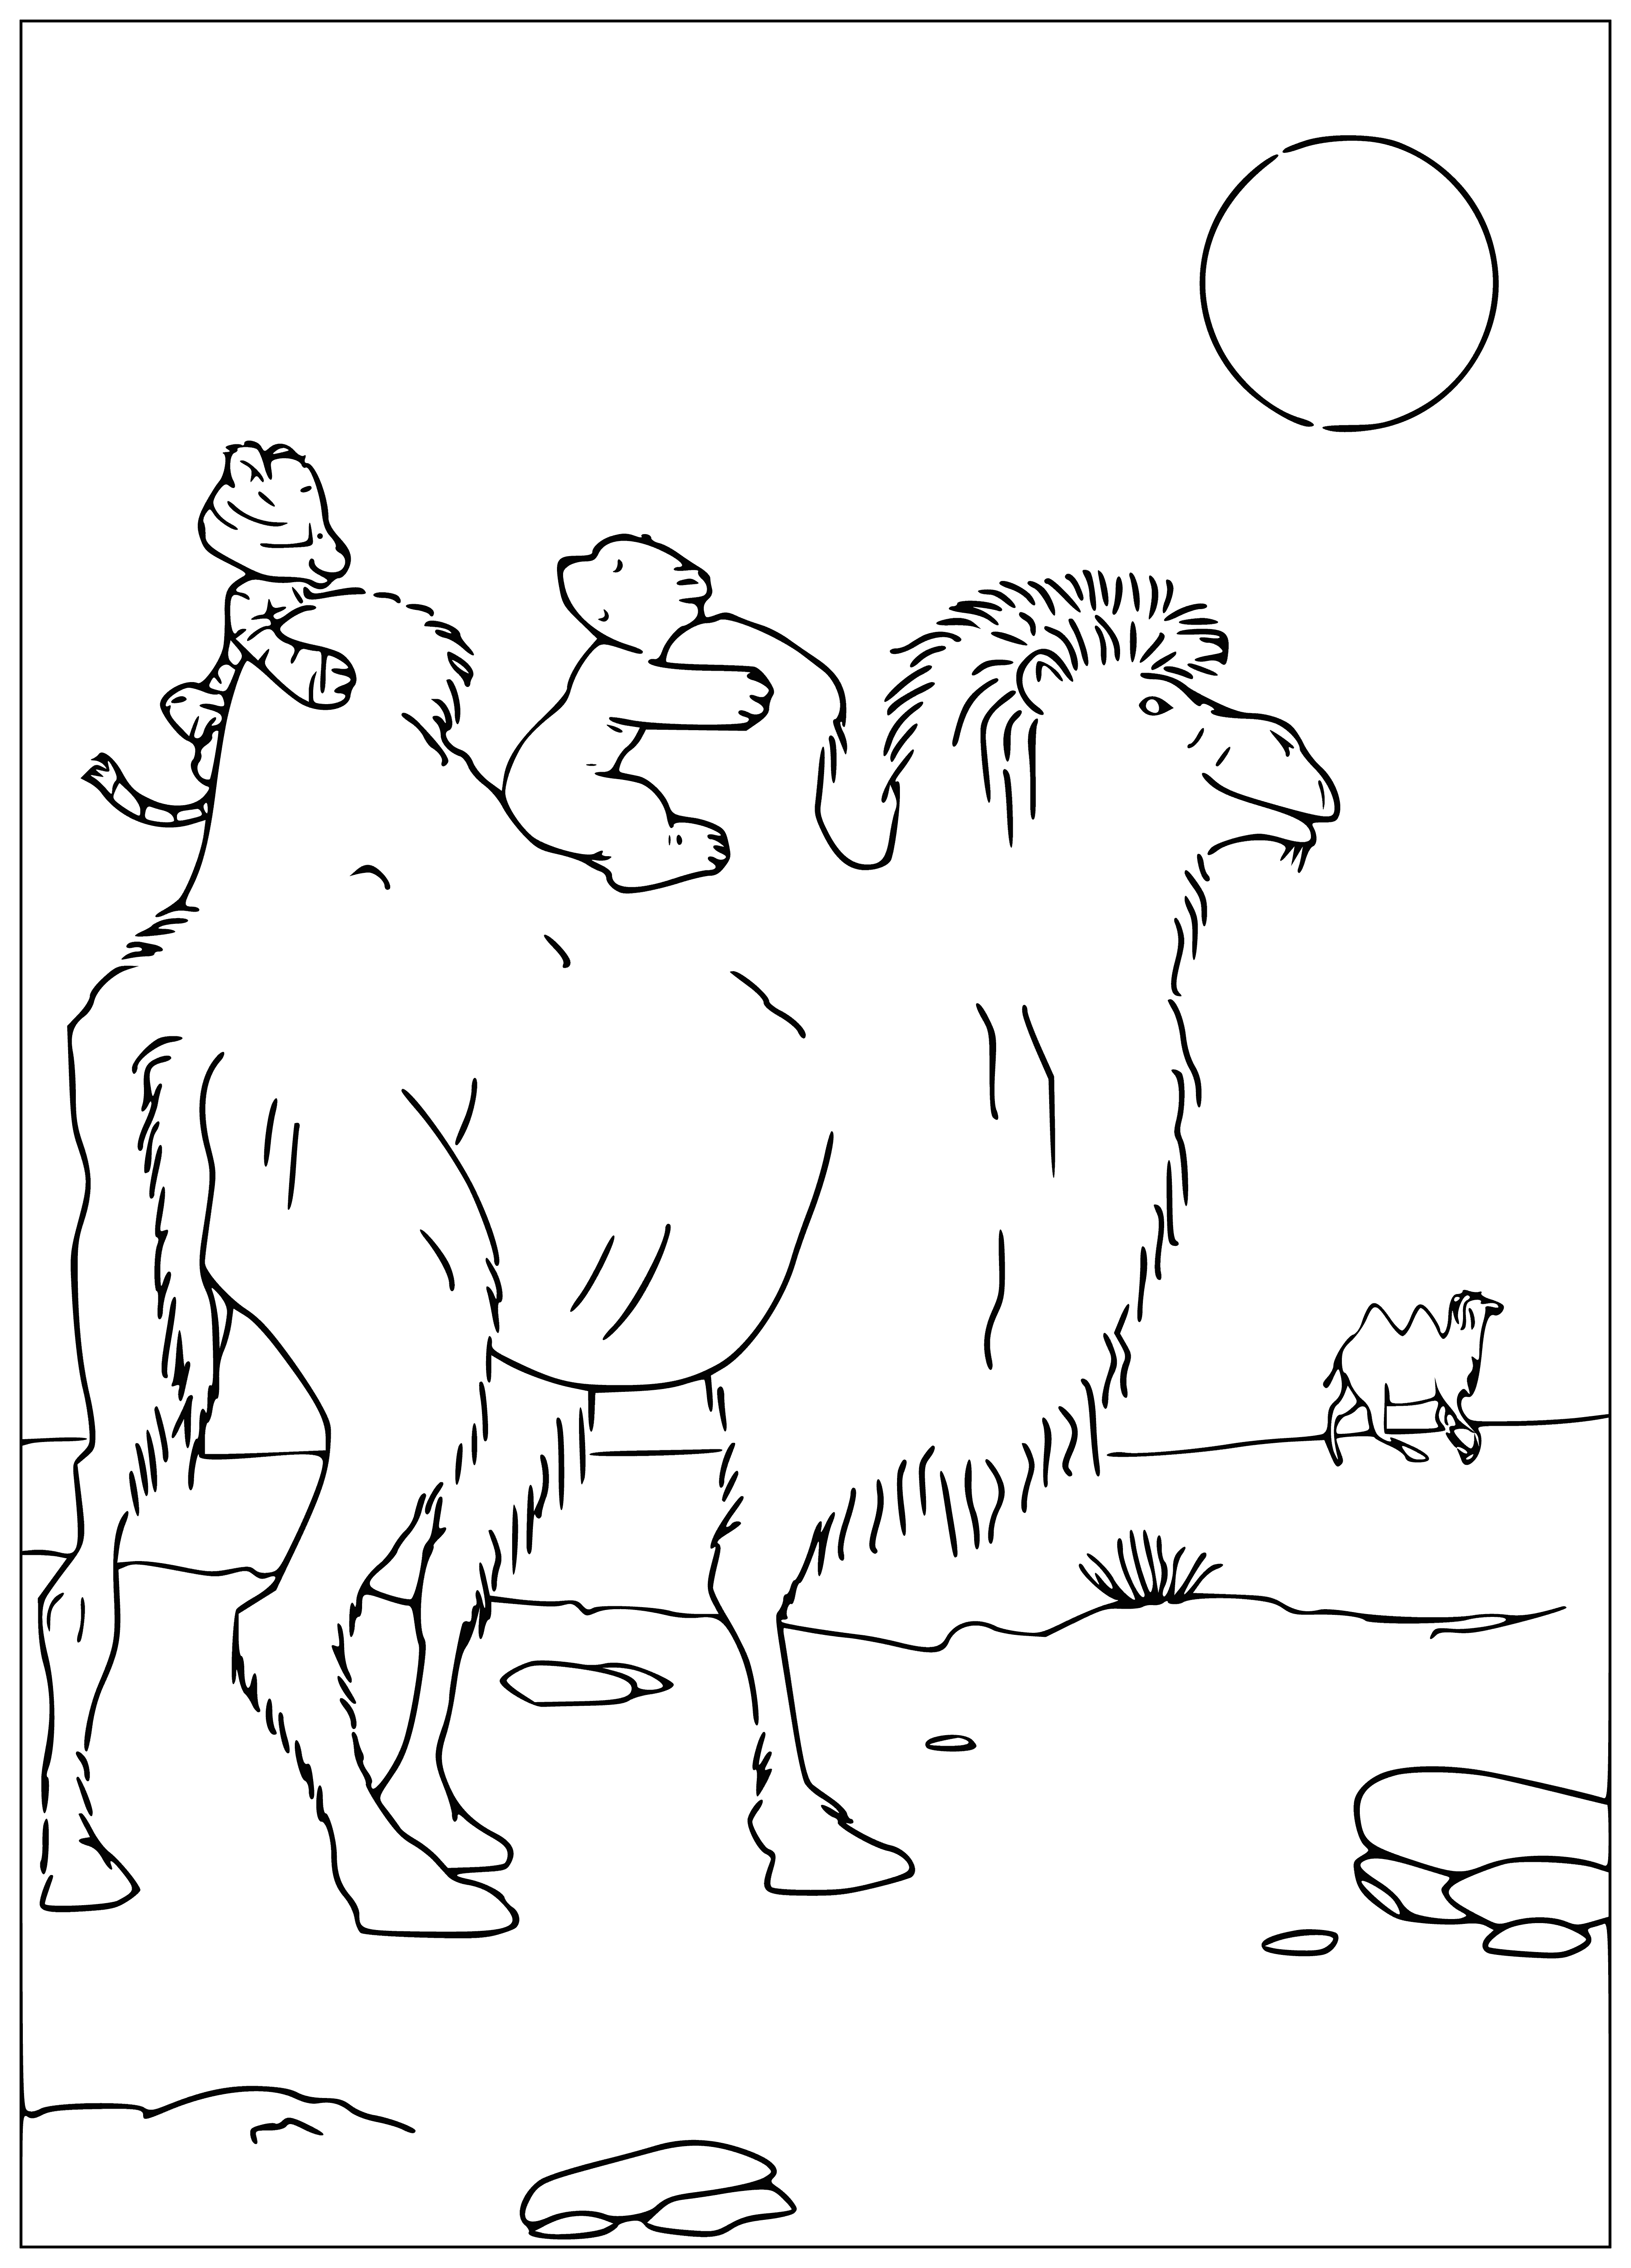 On a camel coloring page